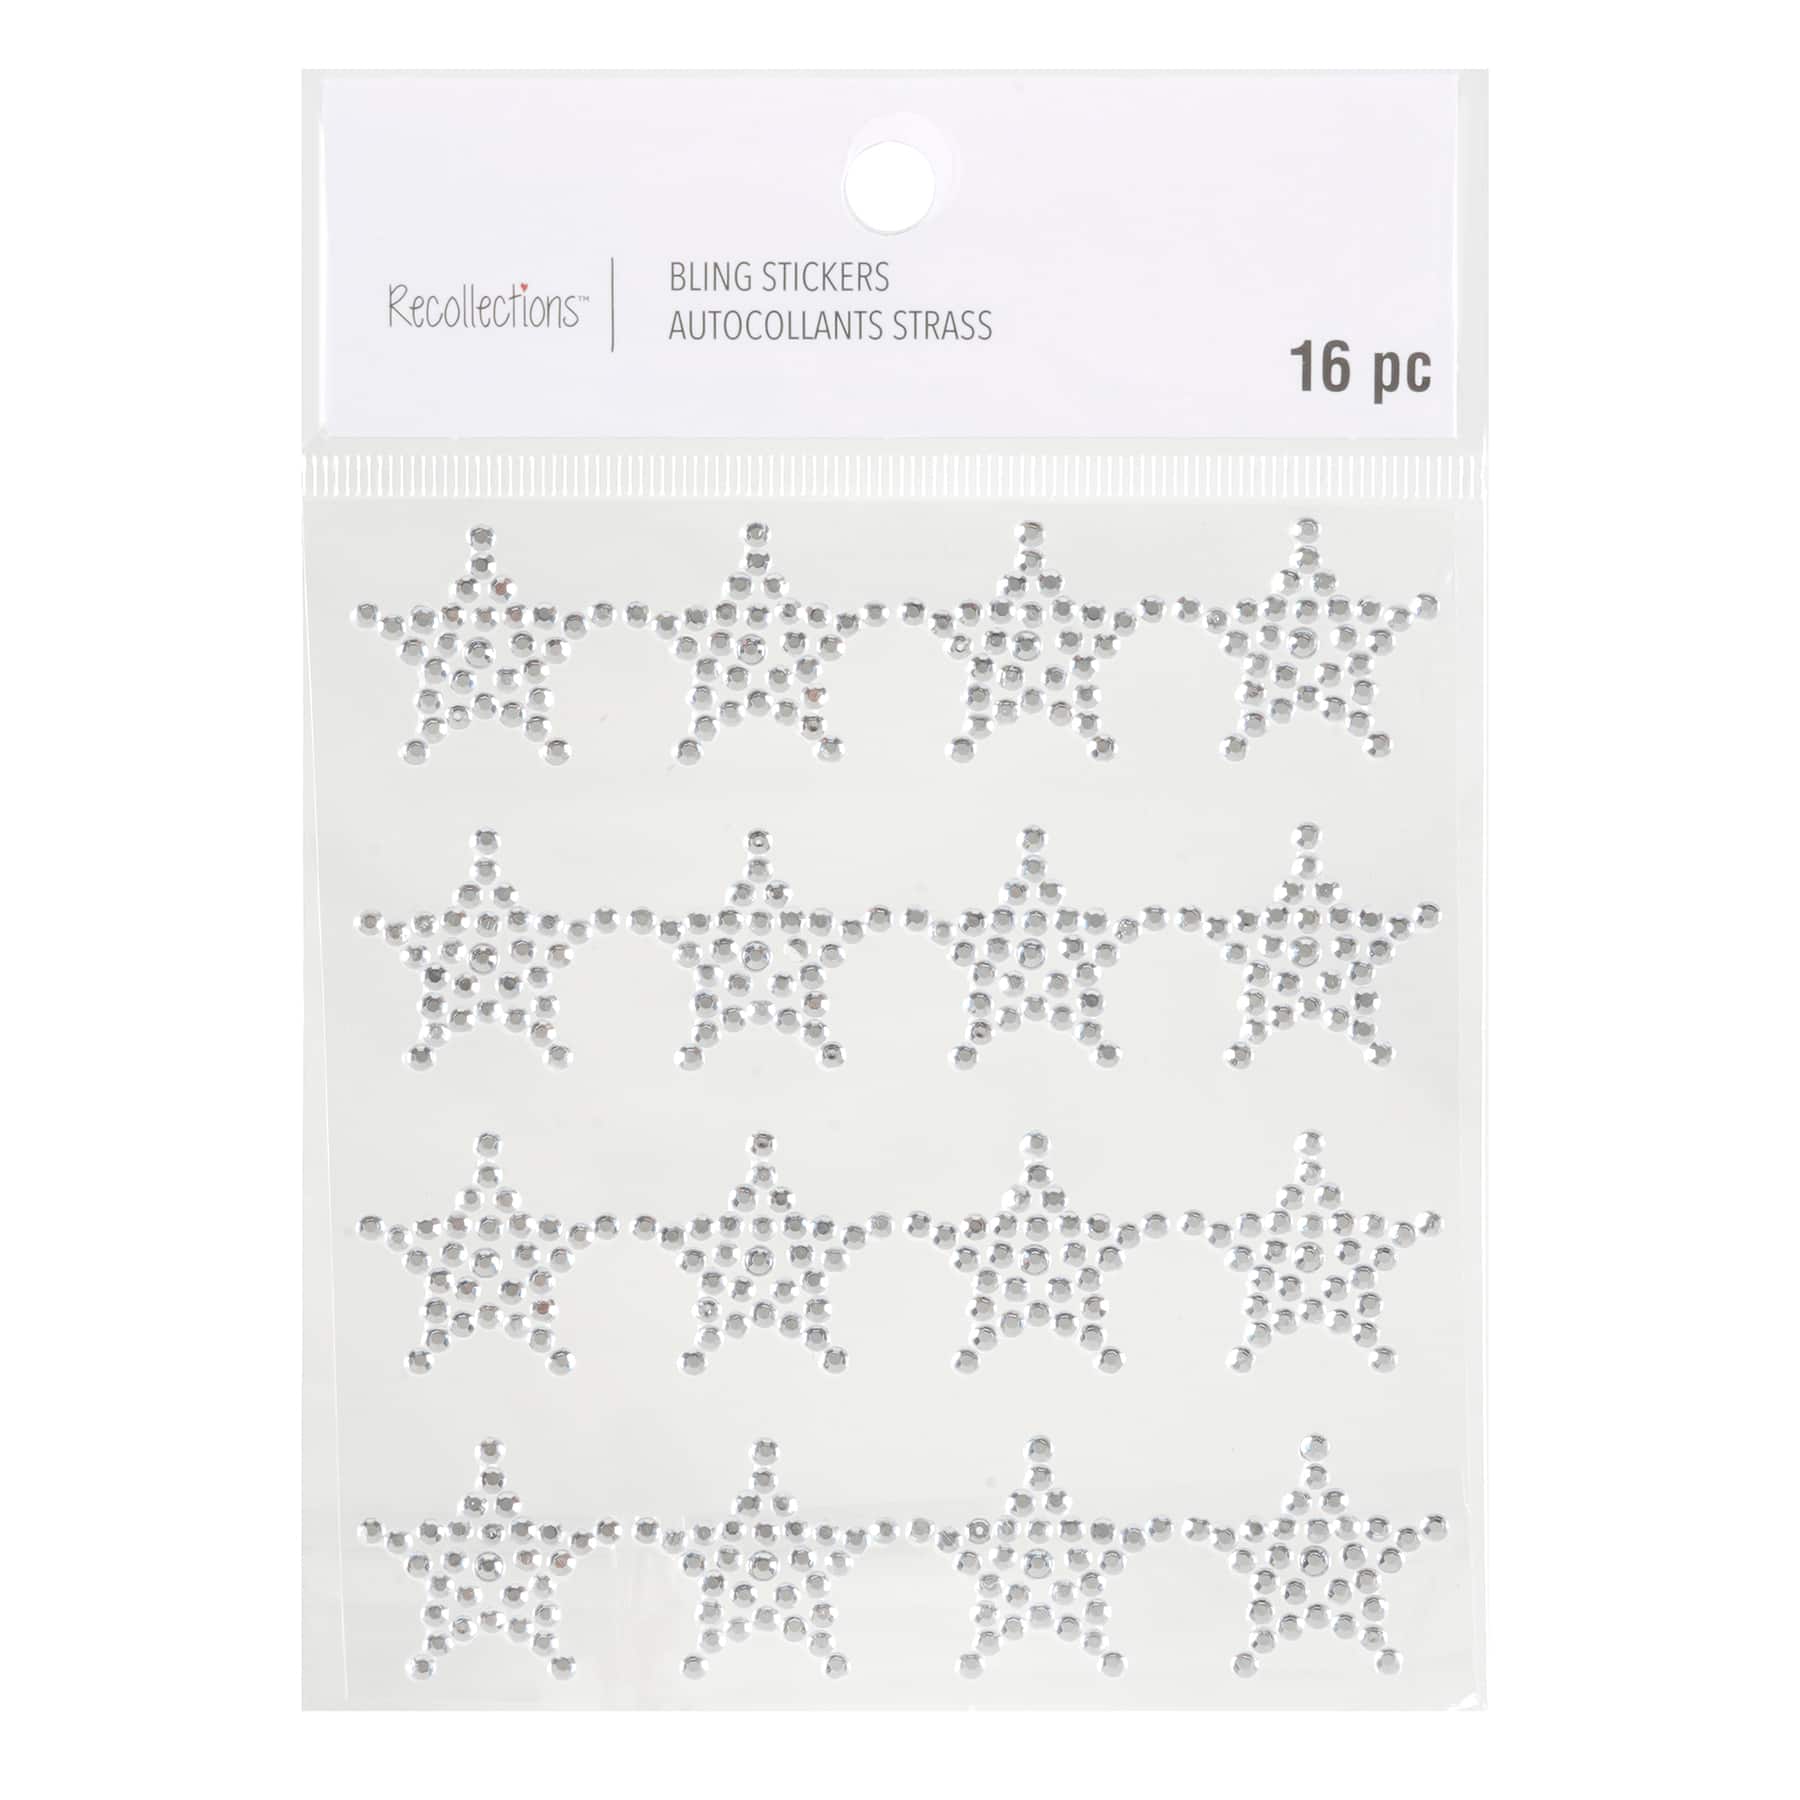 Clear Star Bling Stickers By Recollections™